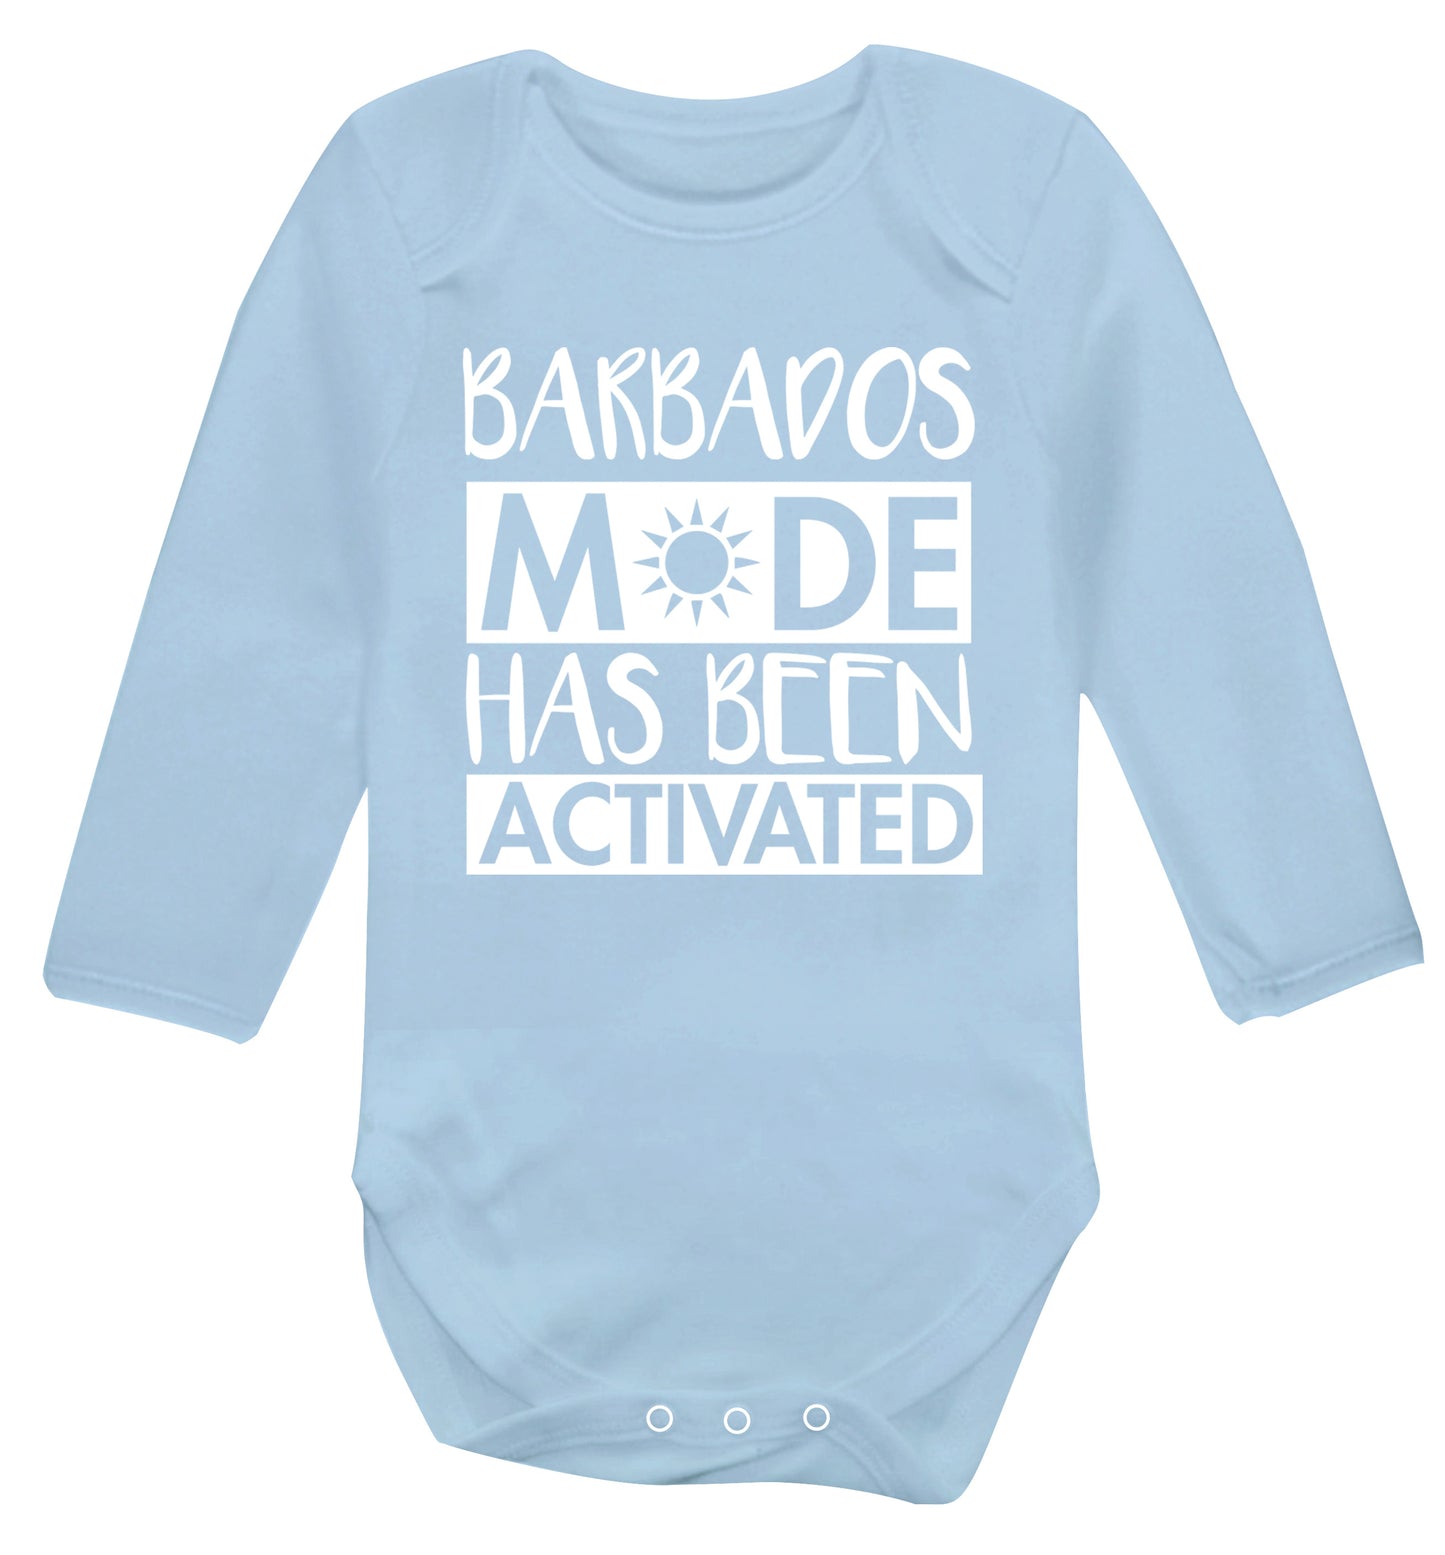 Barbados mode has been activated Baby Vest long sleeved pale blue 6-12 months